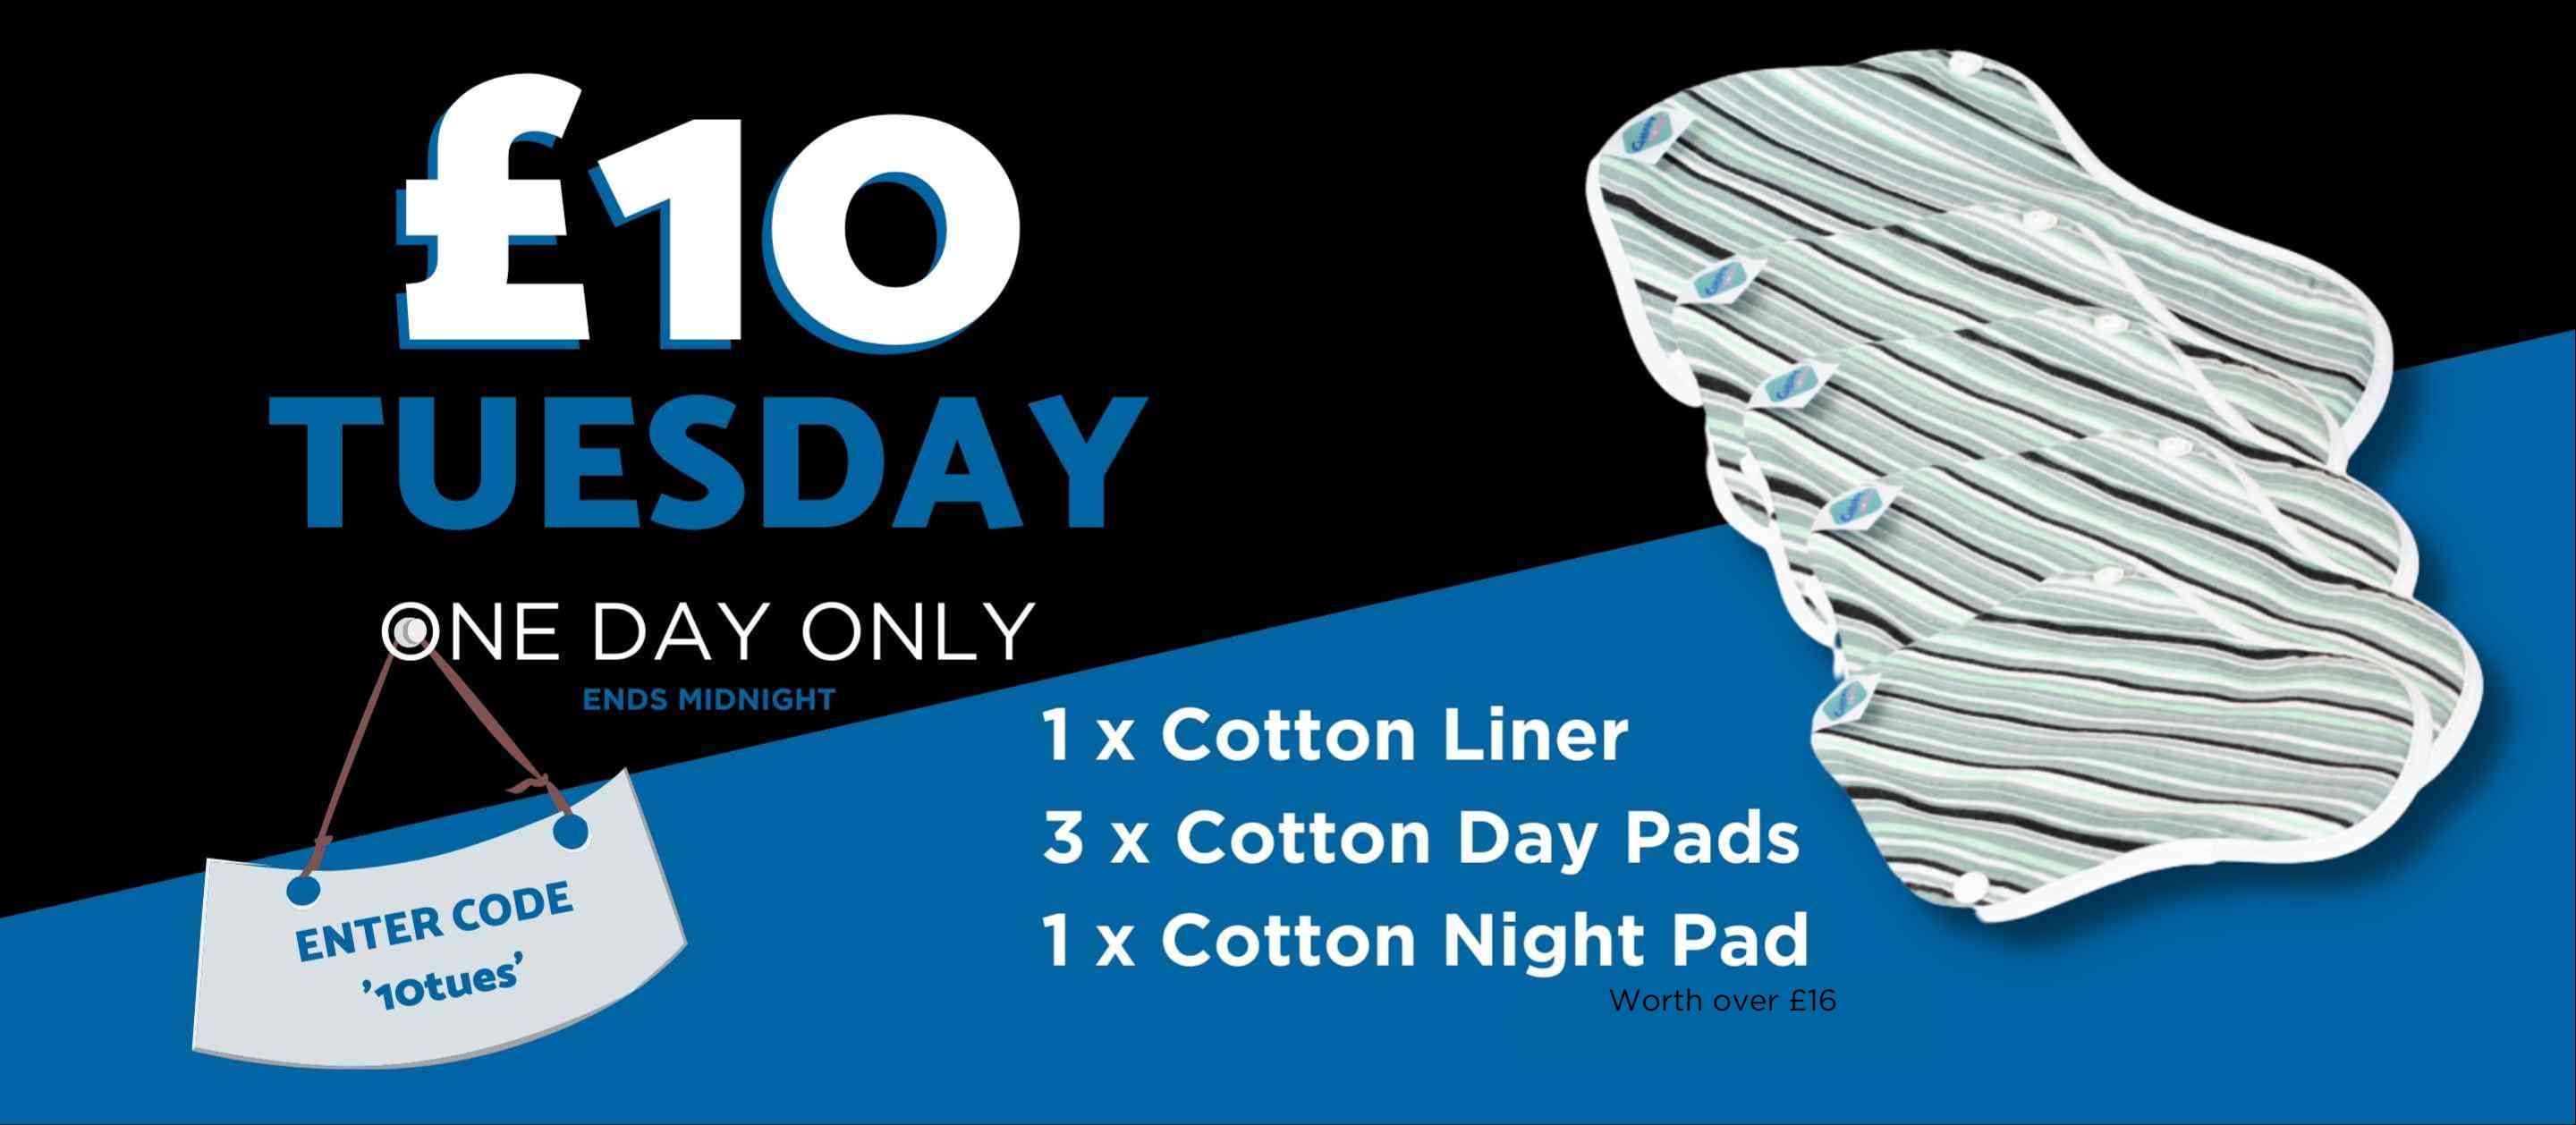 One liner, three day pads and a night pad for £10